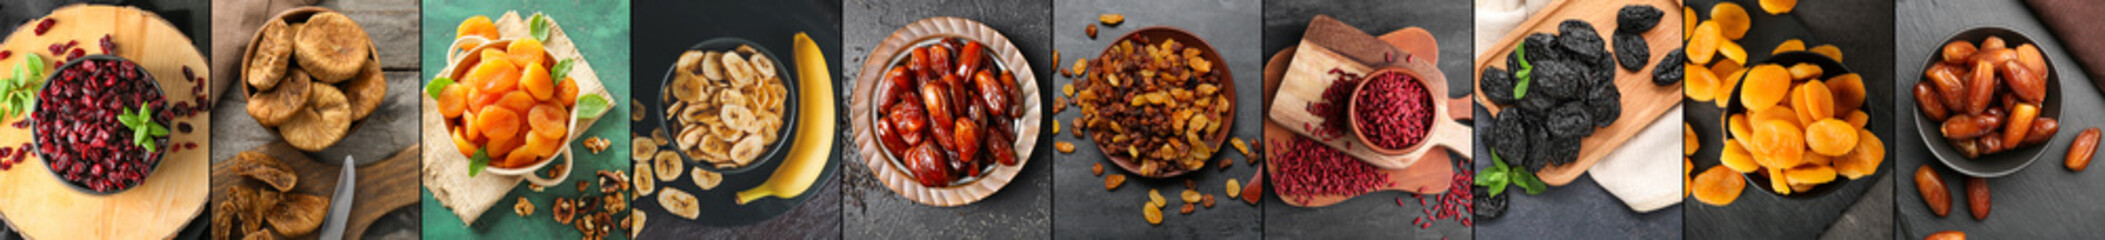 Assortment of tasty dried fruits, top view